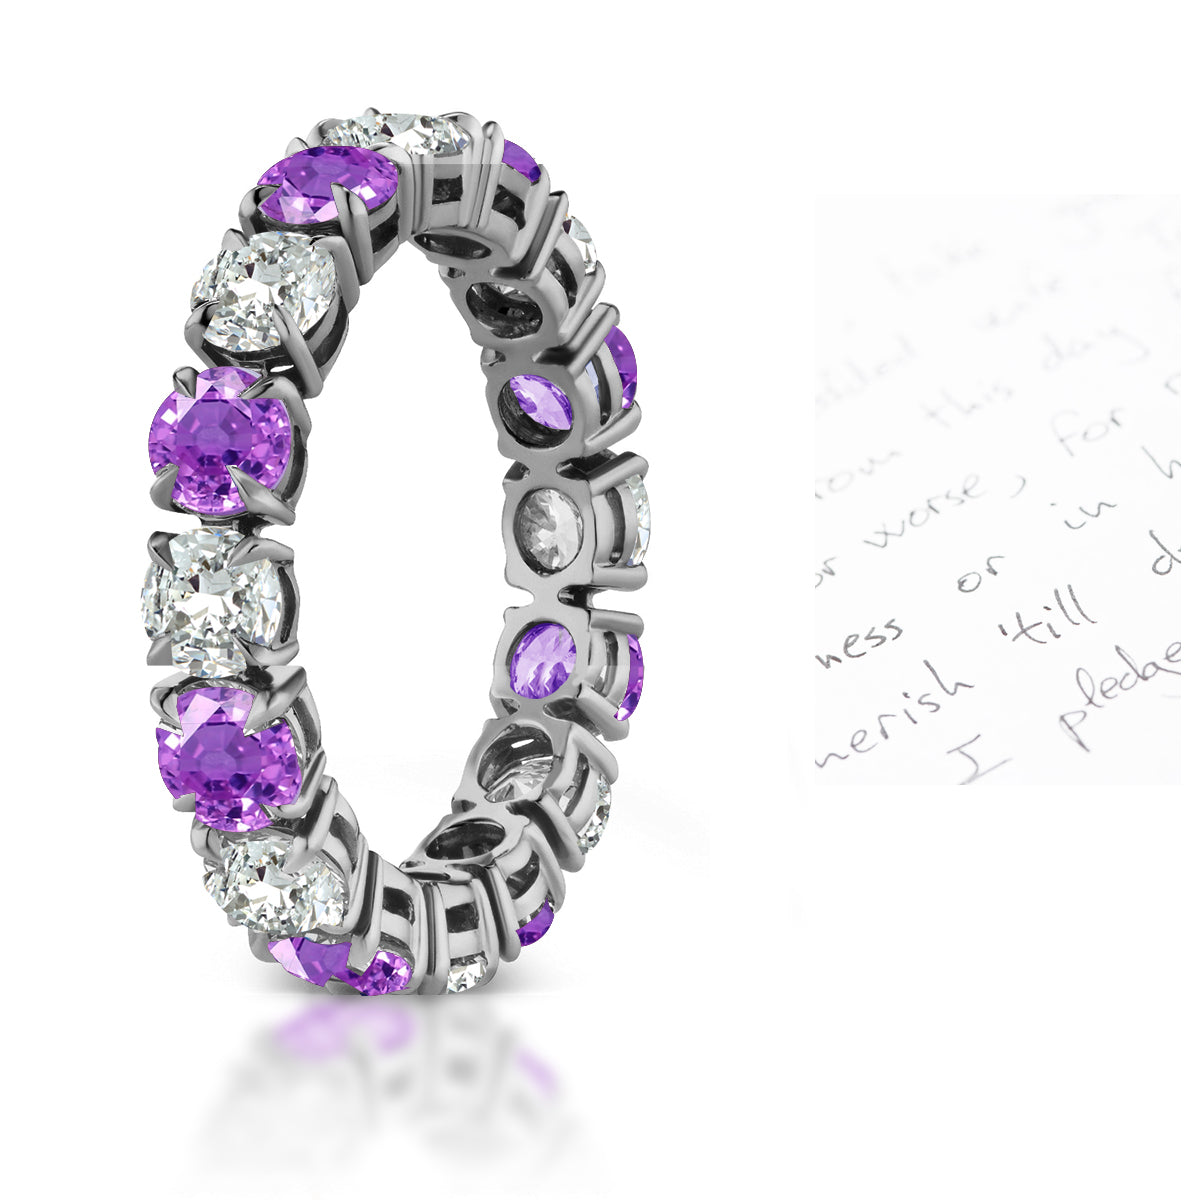 109 custom made unique stackable alternating round cut purple sapphire and diamond prong set eternity ring